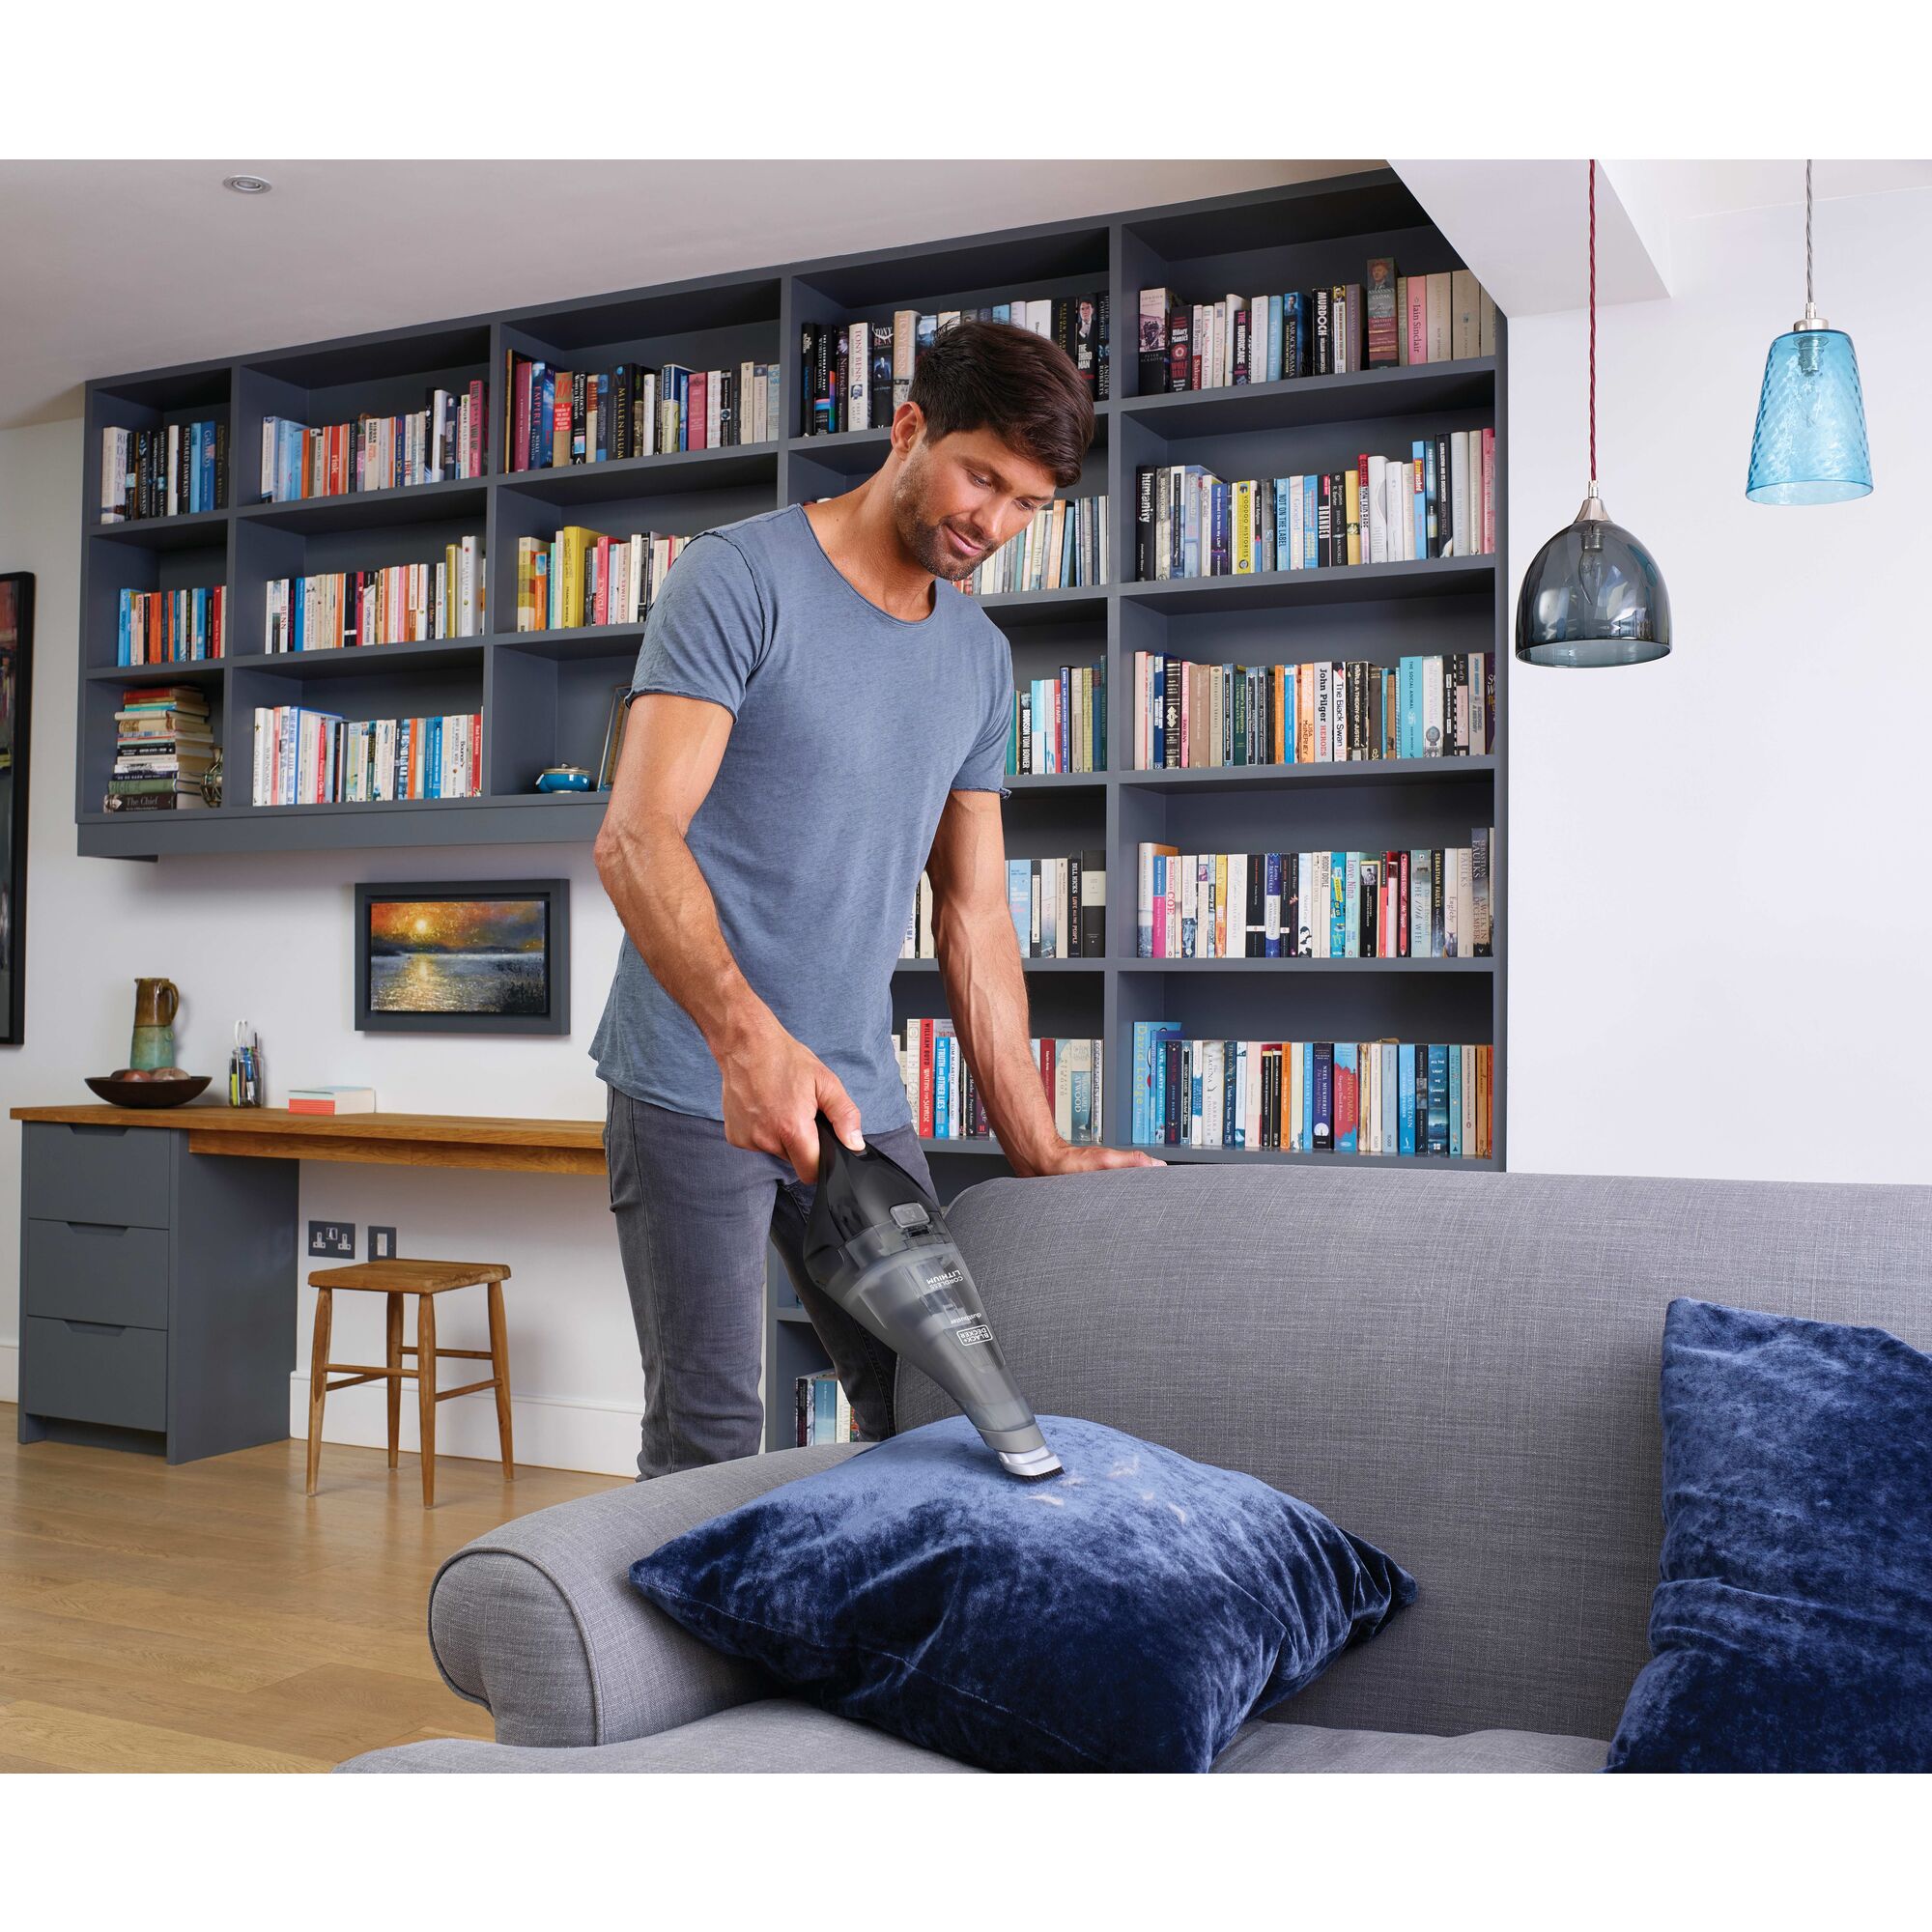 dust buster Quick Clean Cordless Hand Vacuum being used by person to clean couch cushions.